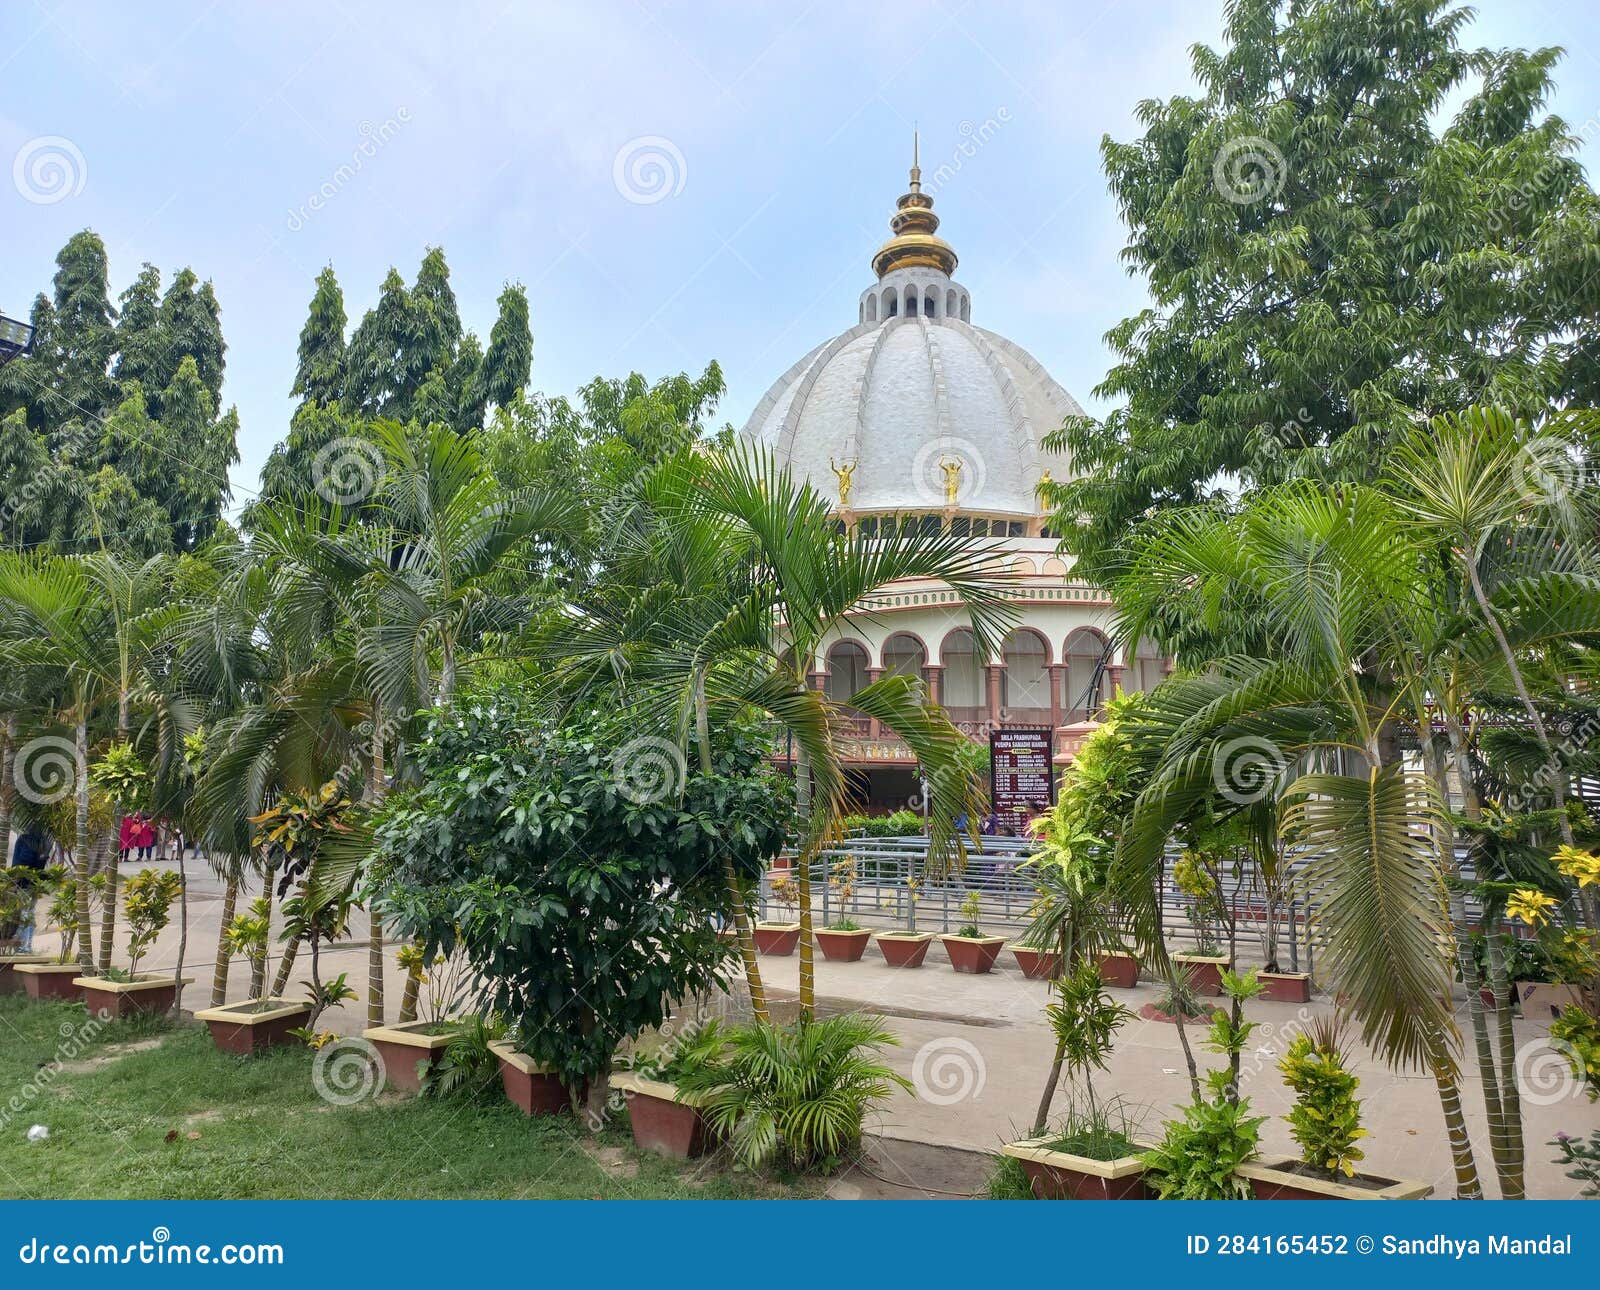 view of the world famous iskcon temple, mayapur, west bengal